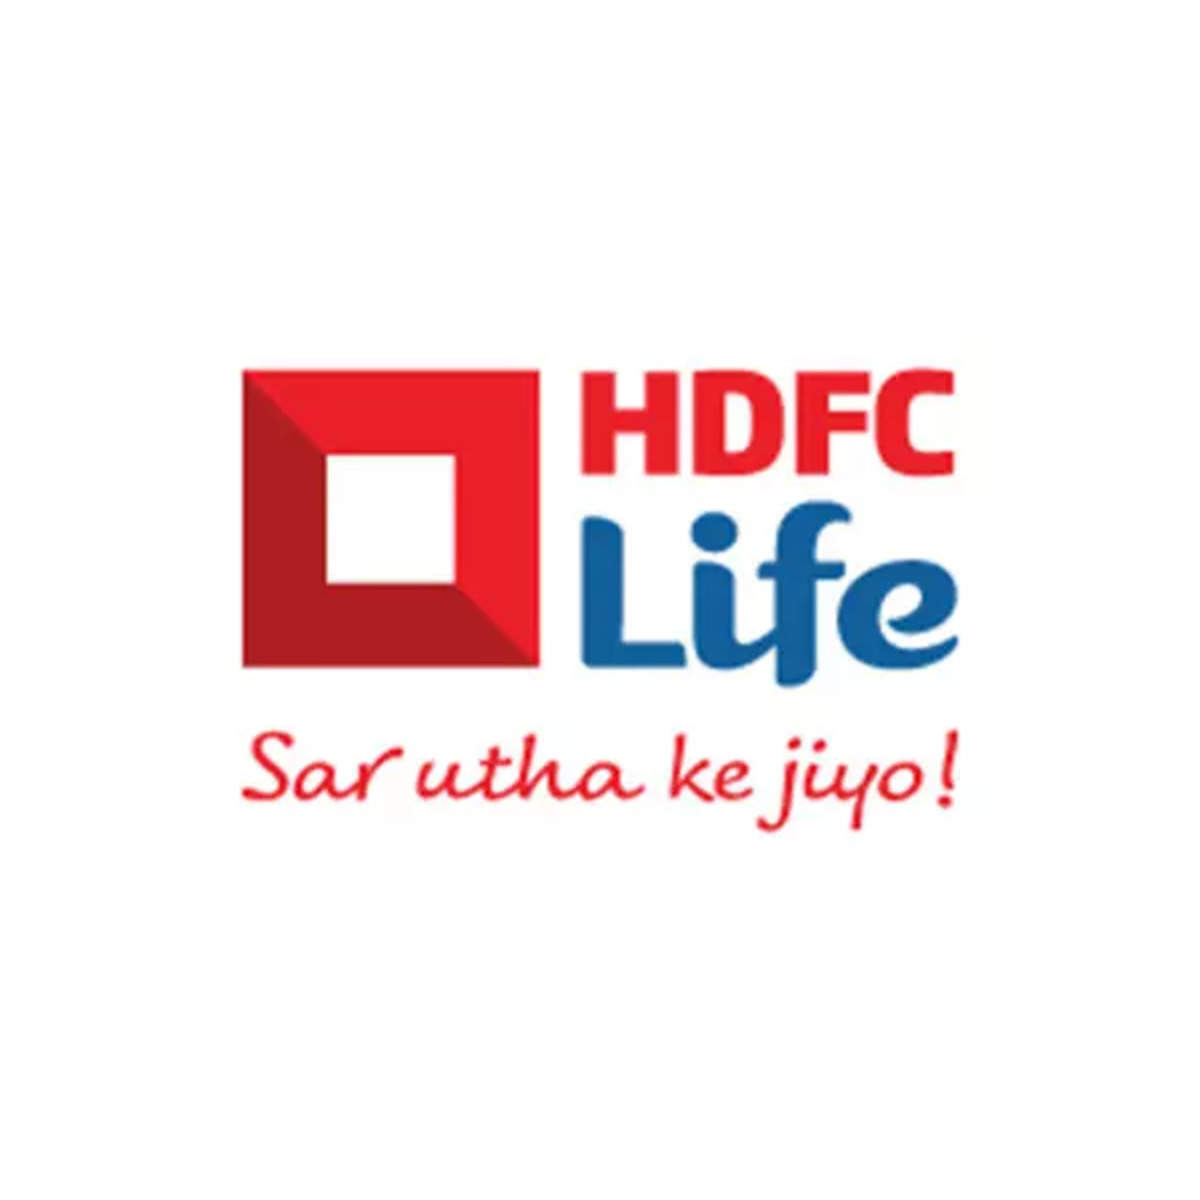 HDFC Life launches its musical logo - a unique sonic identity